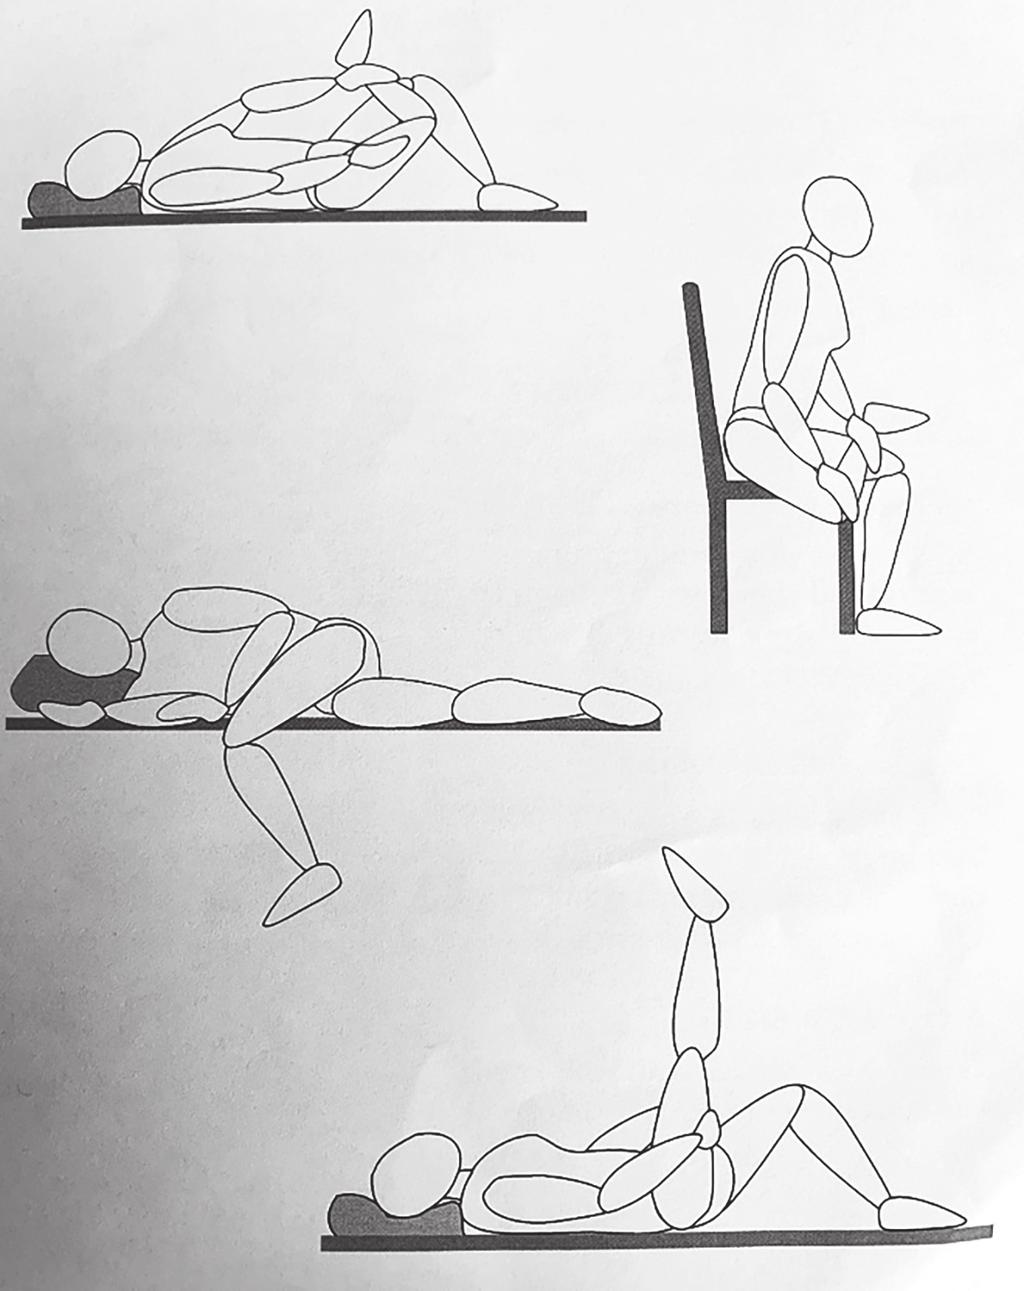 Stretches Hold each one for 15 seconds to